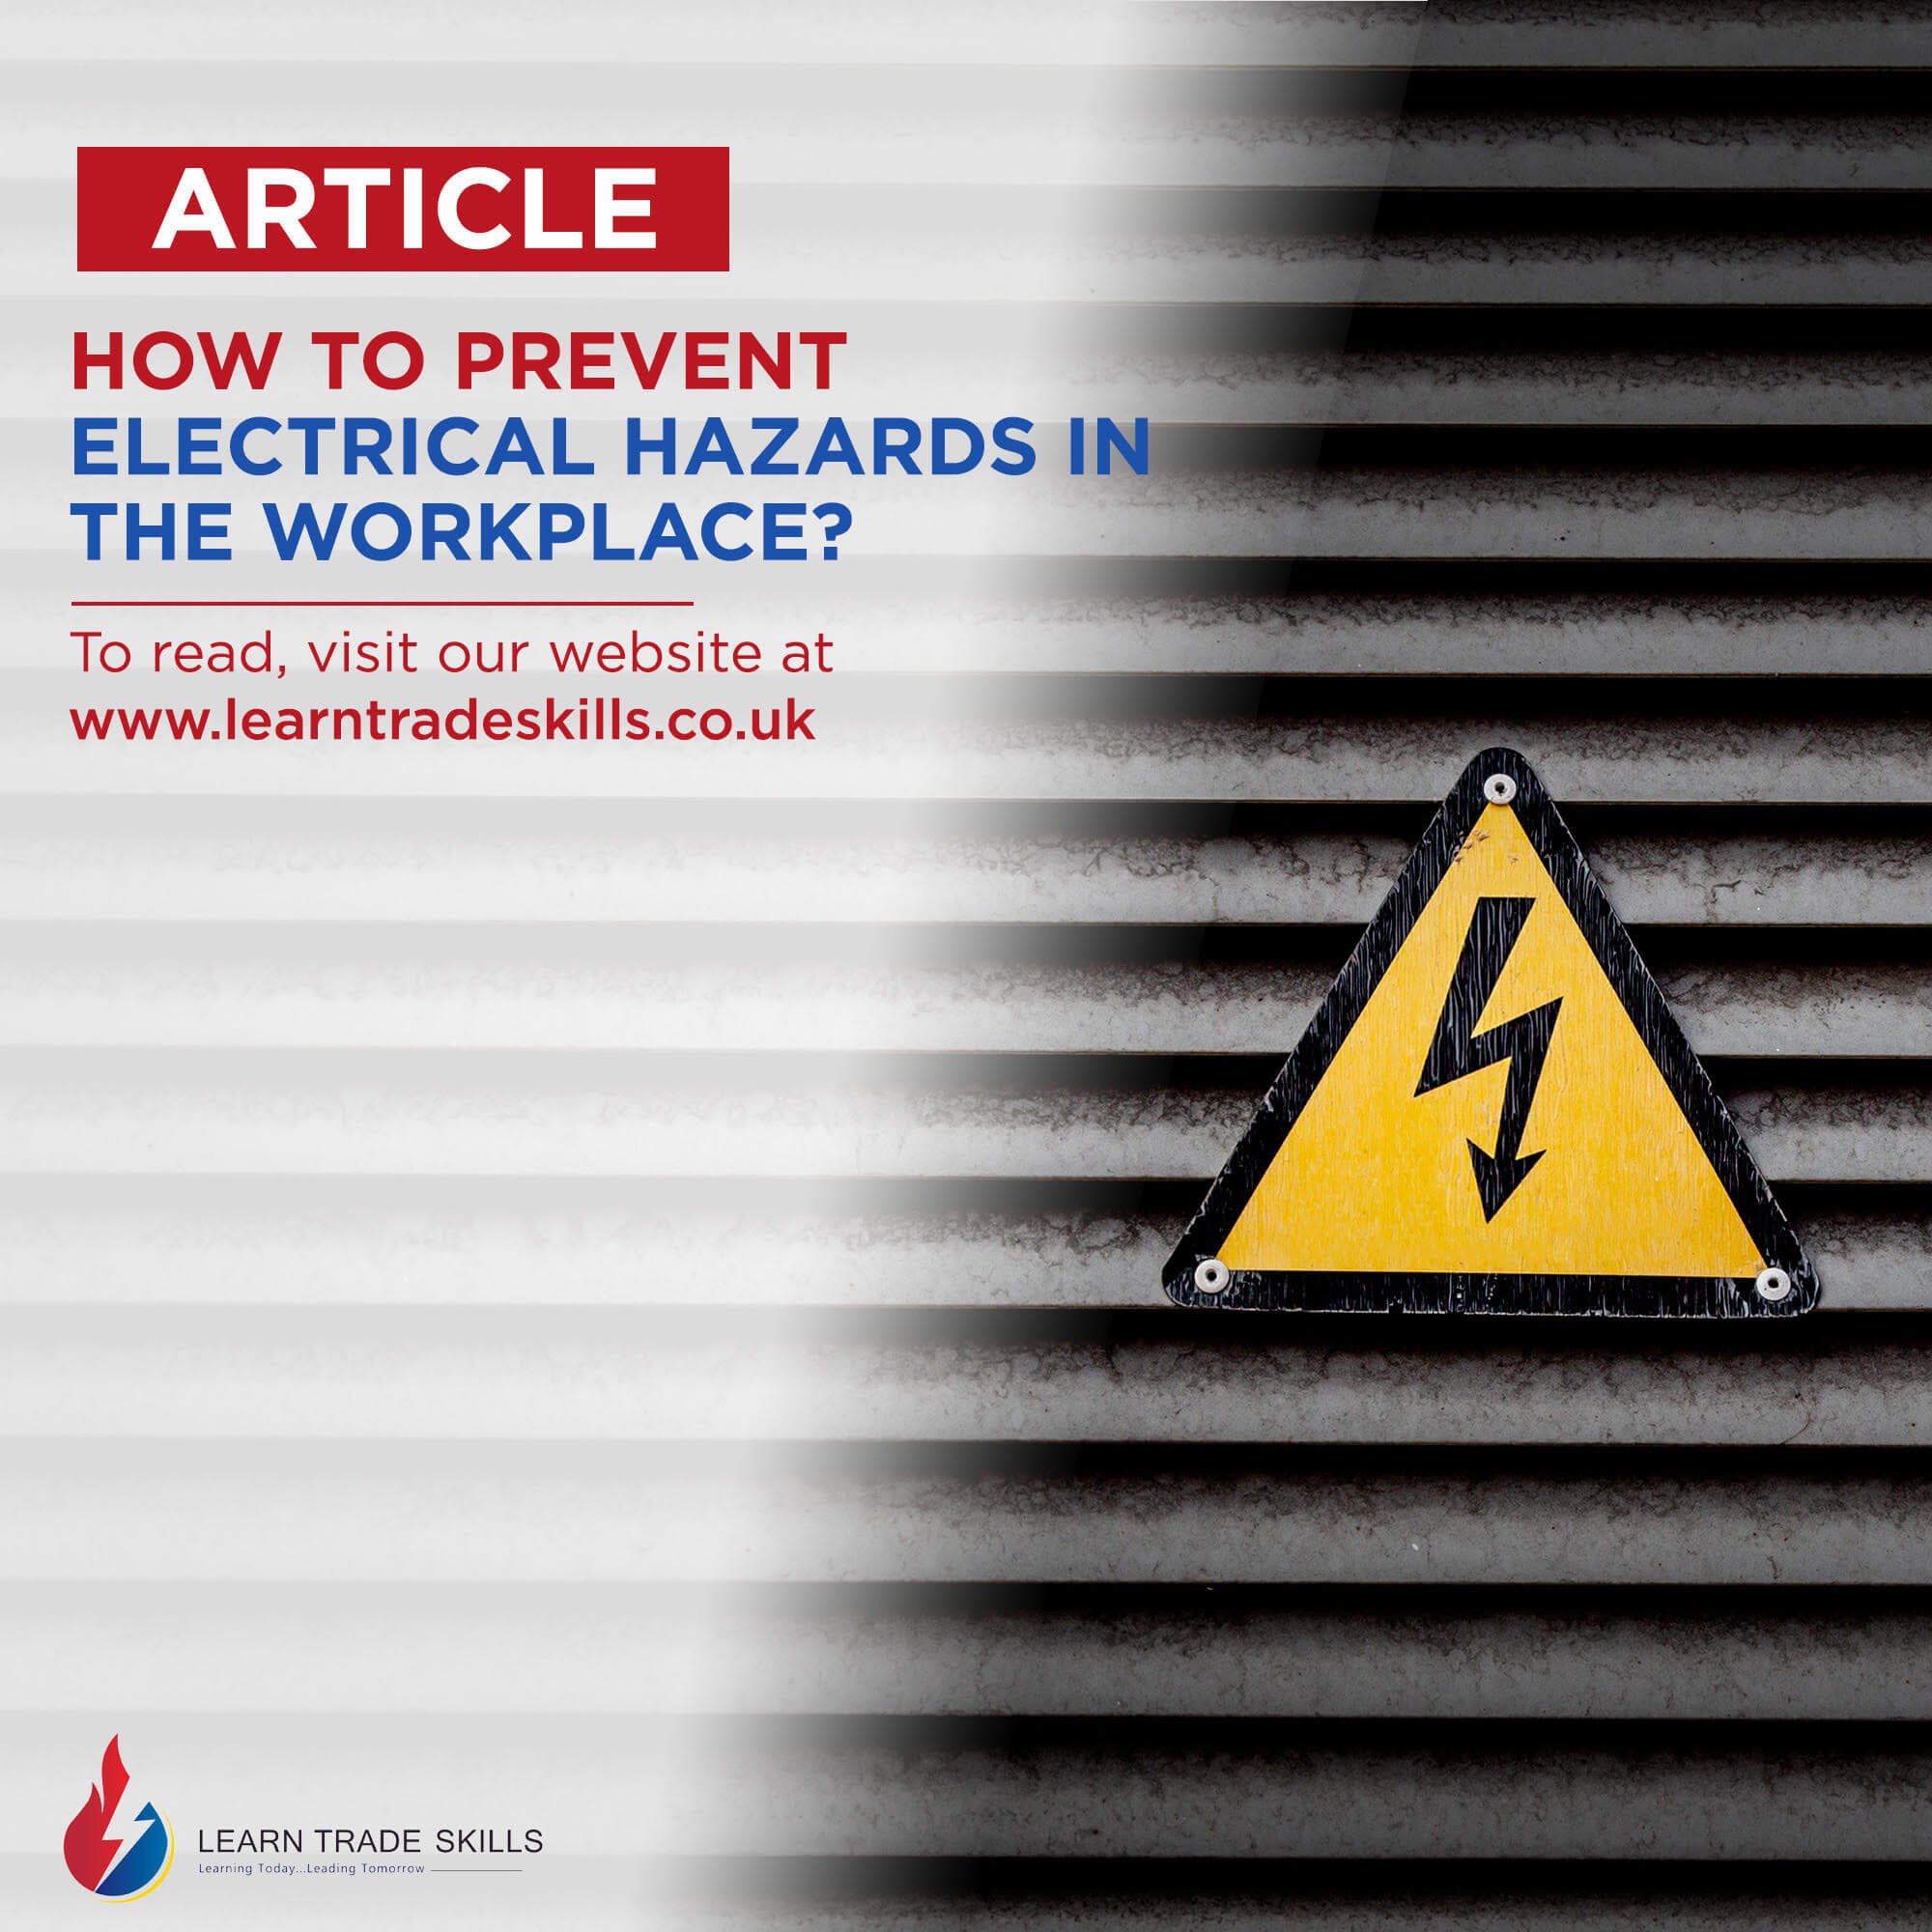 How to Prevent Electrical Hazards in the Workplace?